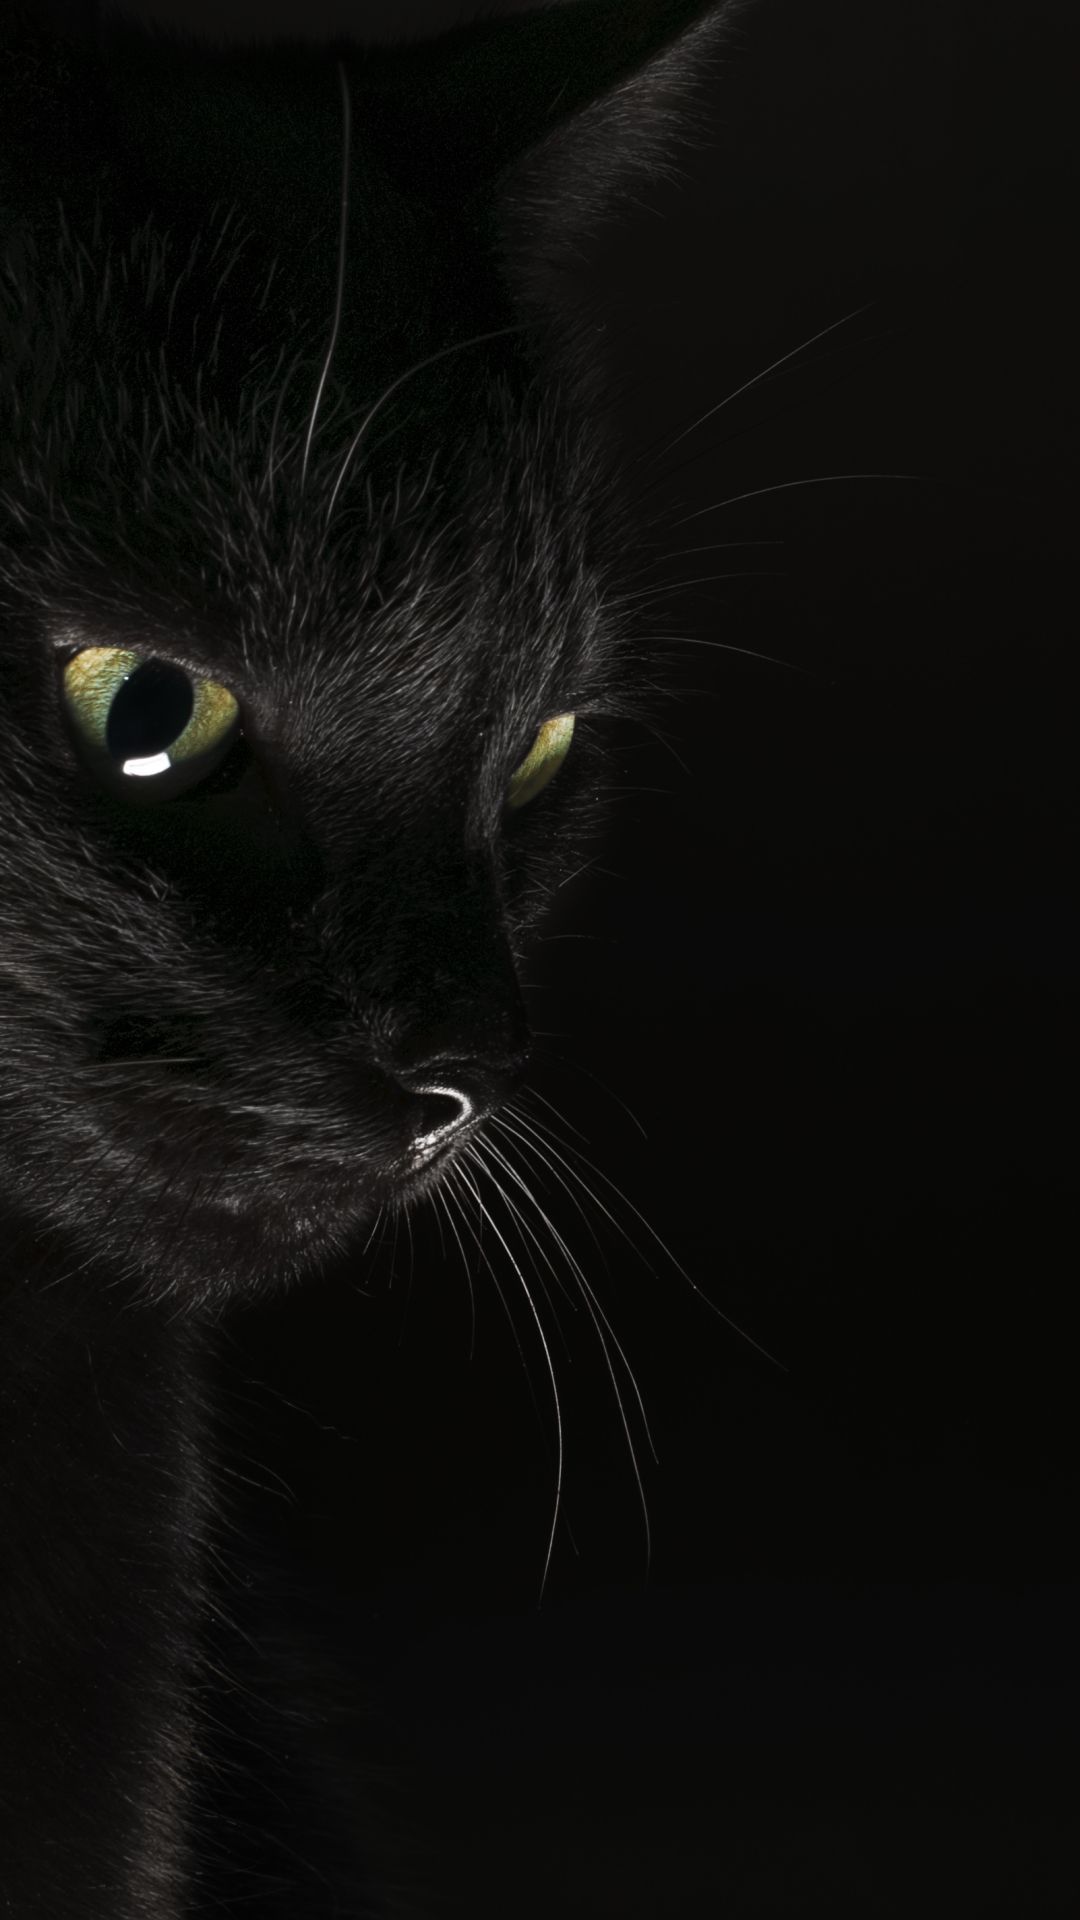 Black Cats and Kittens Wallpapers - 4k, HD Black Cats and Kittens